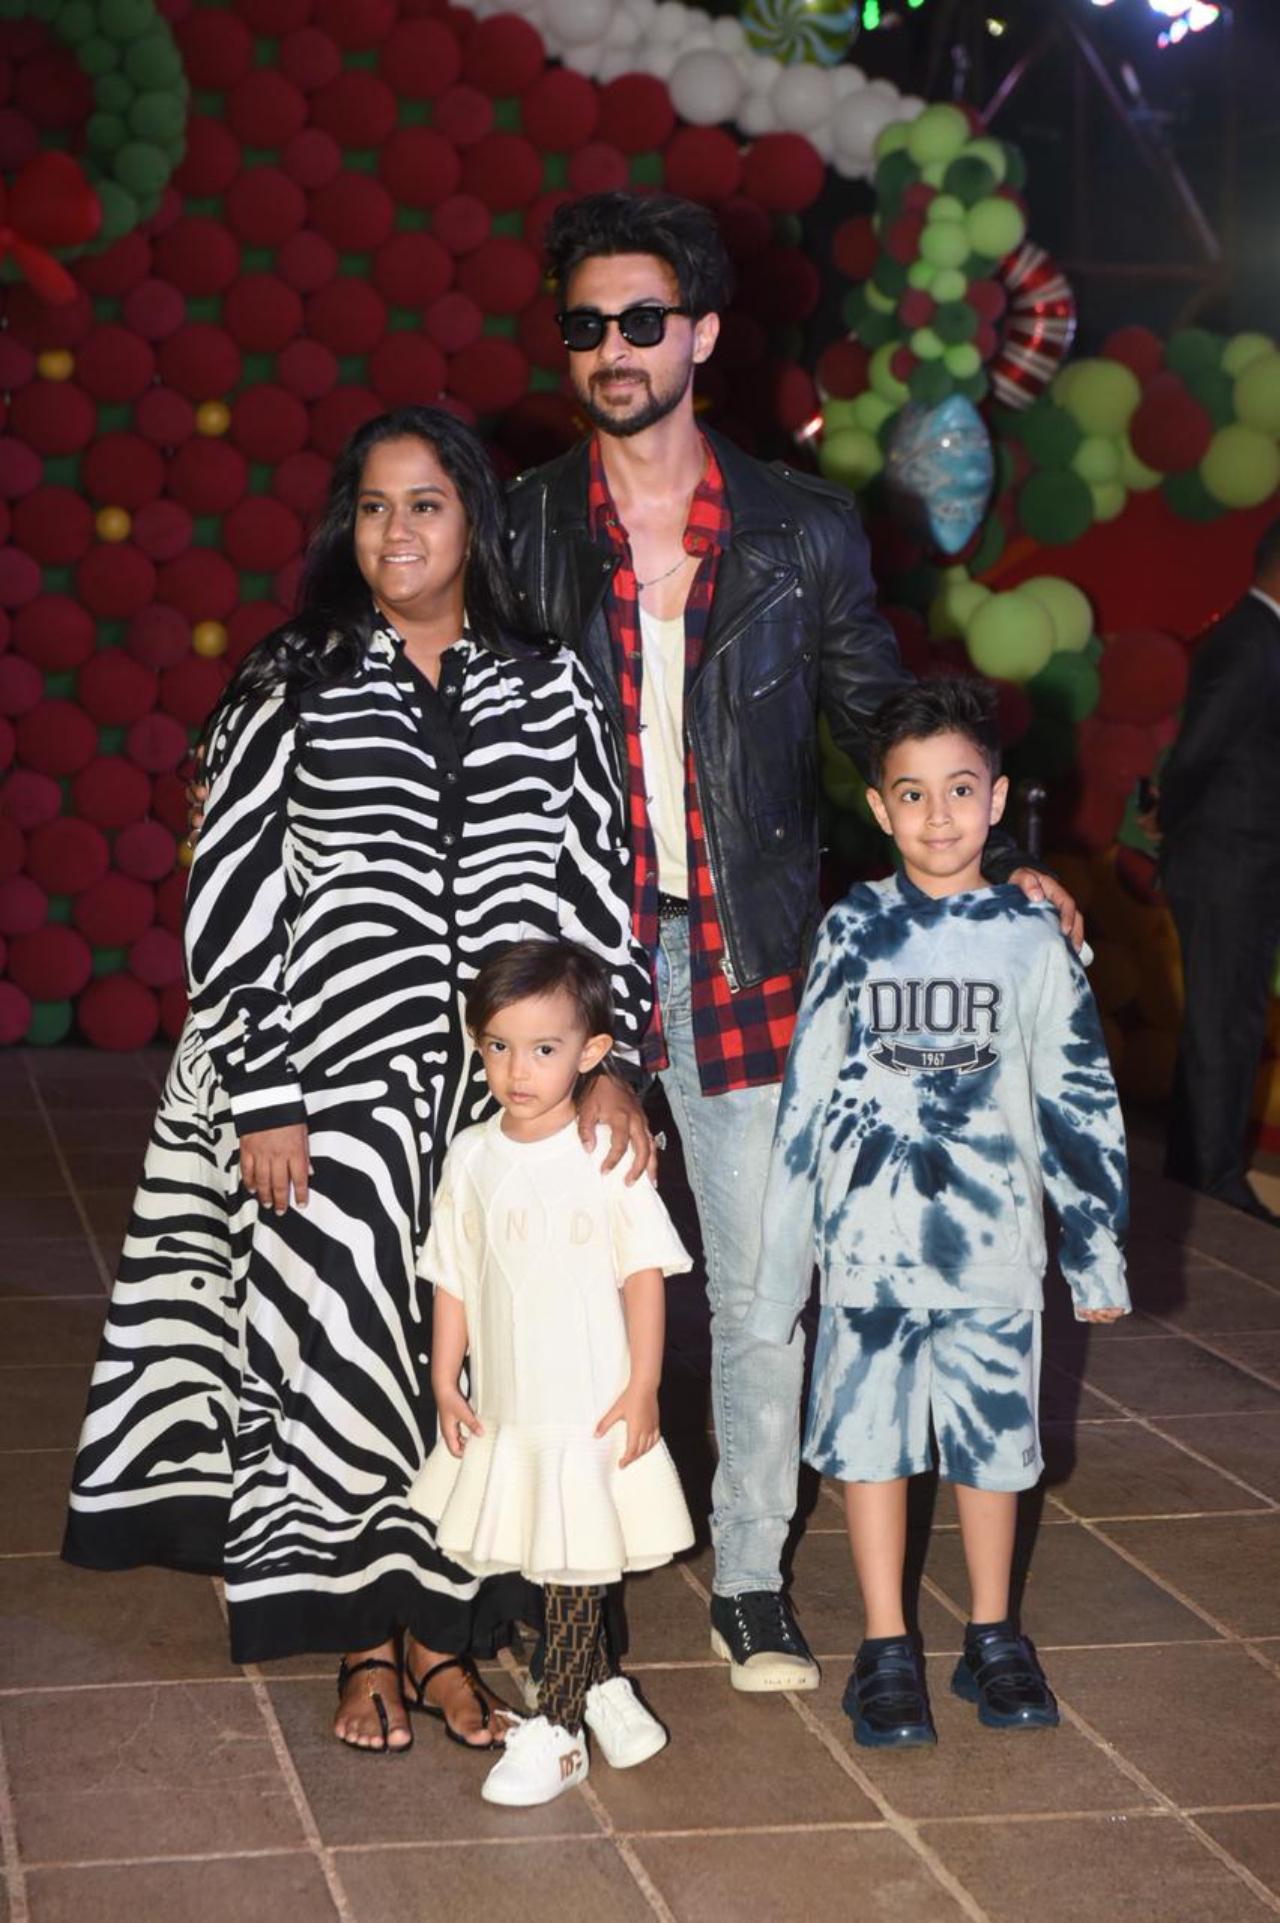 Actor Aayush Sharma, his wife Arpita Khan Sharma, and both children Ayat and Ahil were spotted posing in front of the shutterbugs. The ‘Antim’ actor donned a black jacket over a red checked shirt and blue jeans, whereas Arpita was seen in a black and white printed Kurti